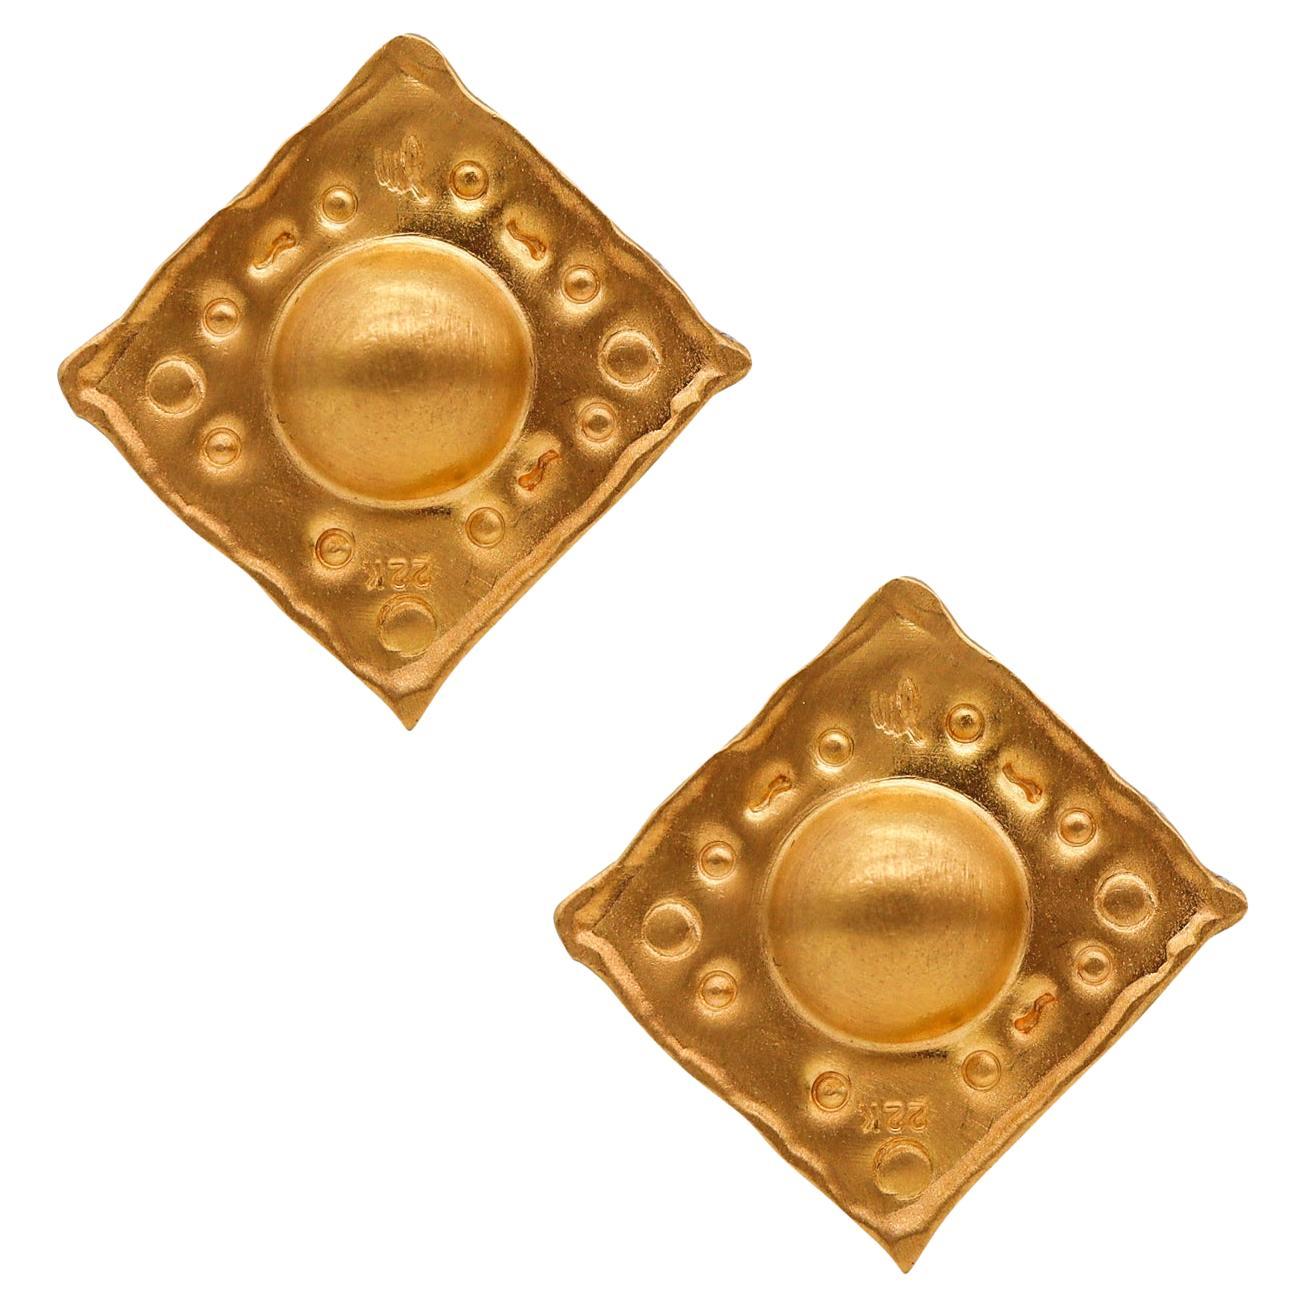 Jean Mahie Paris Artistic Vintage Squared Clips Earrings in Textured 22Kt Yellow For Sale